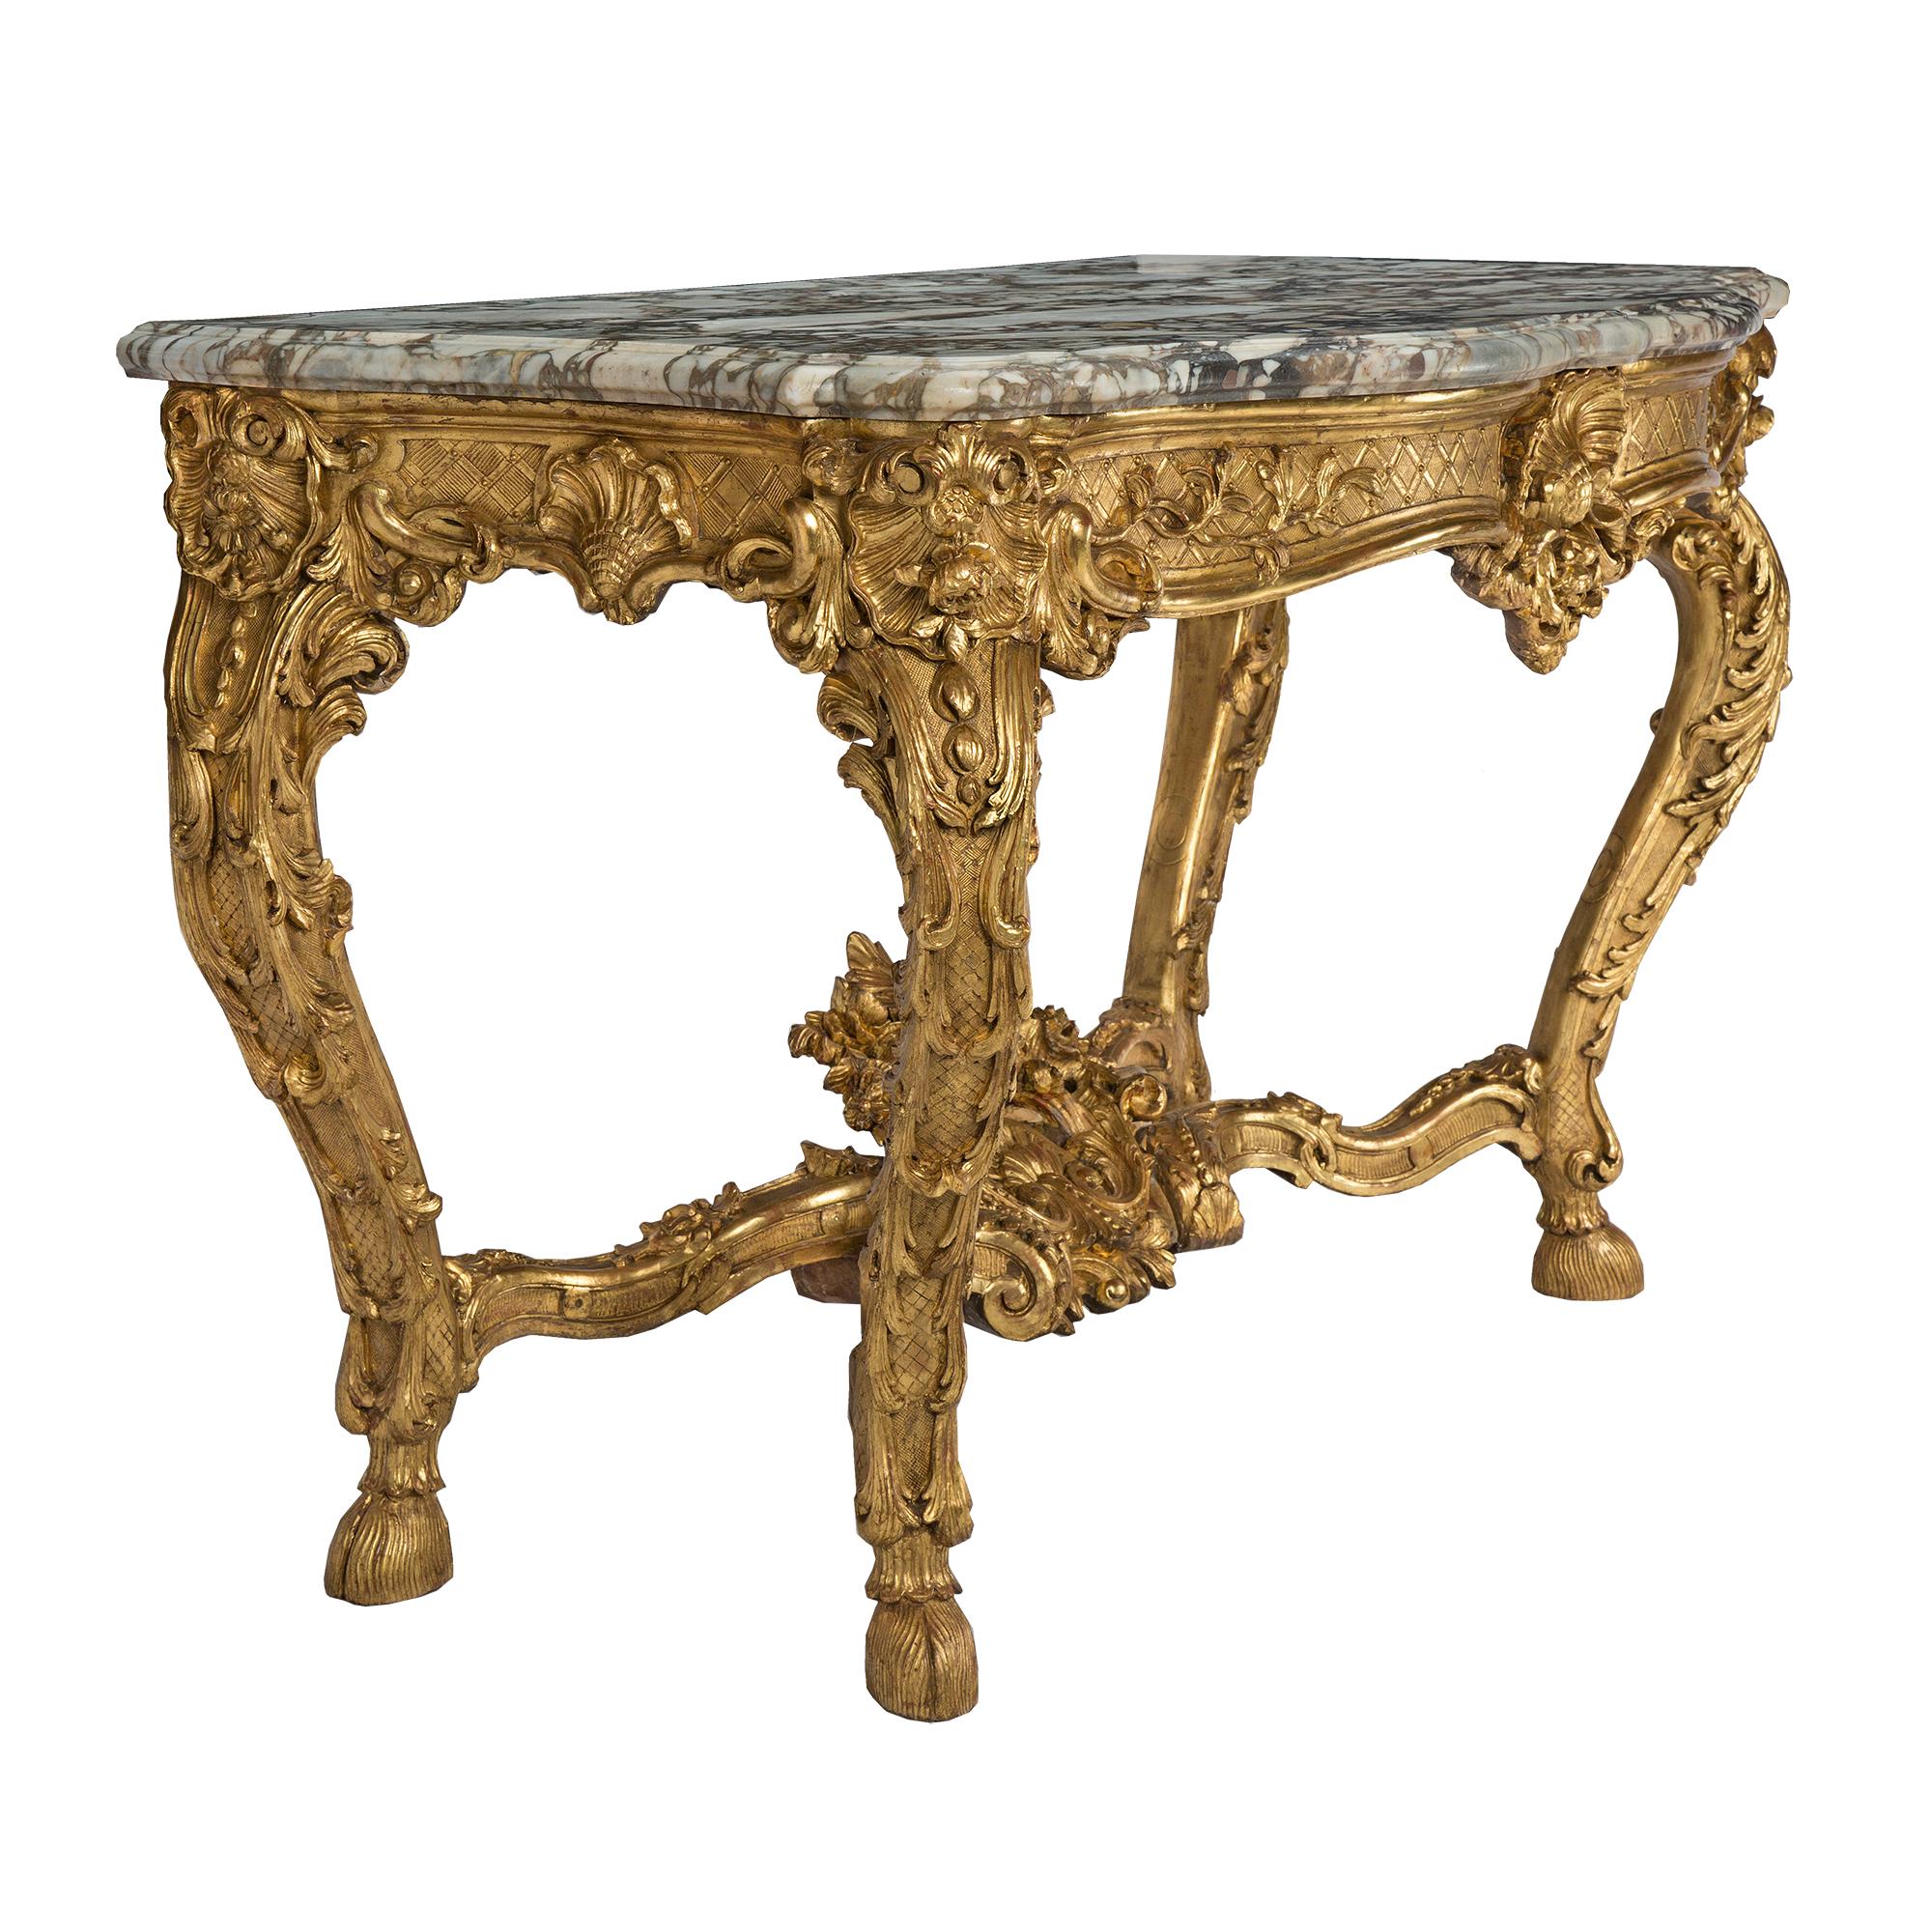 French 18th Century Regence Period Giltwood and Marble Freestanding Console In Good Condition For Sale In West Palm Beach, FL